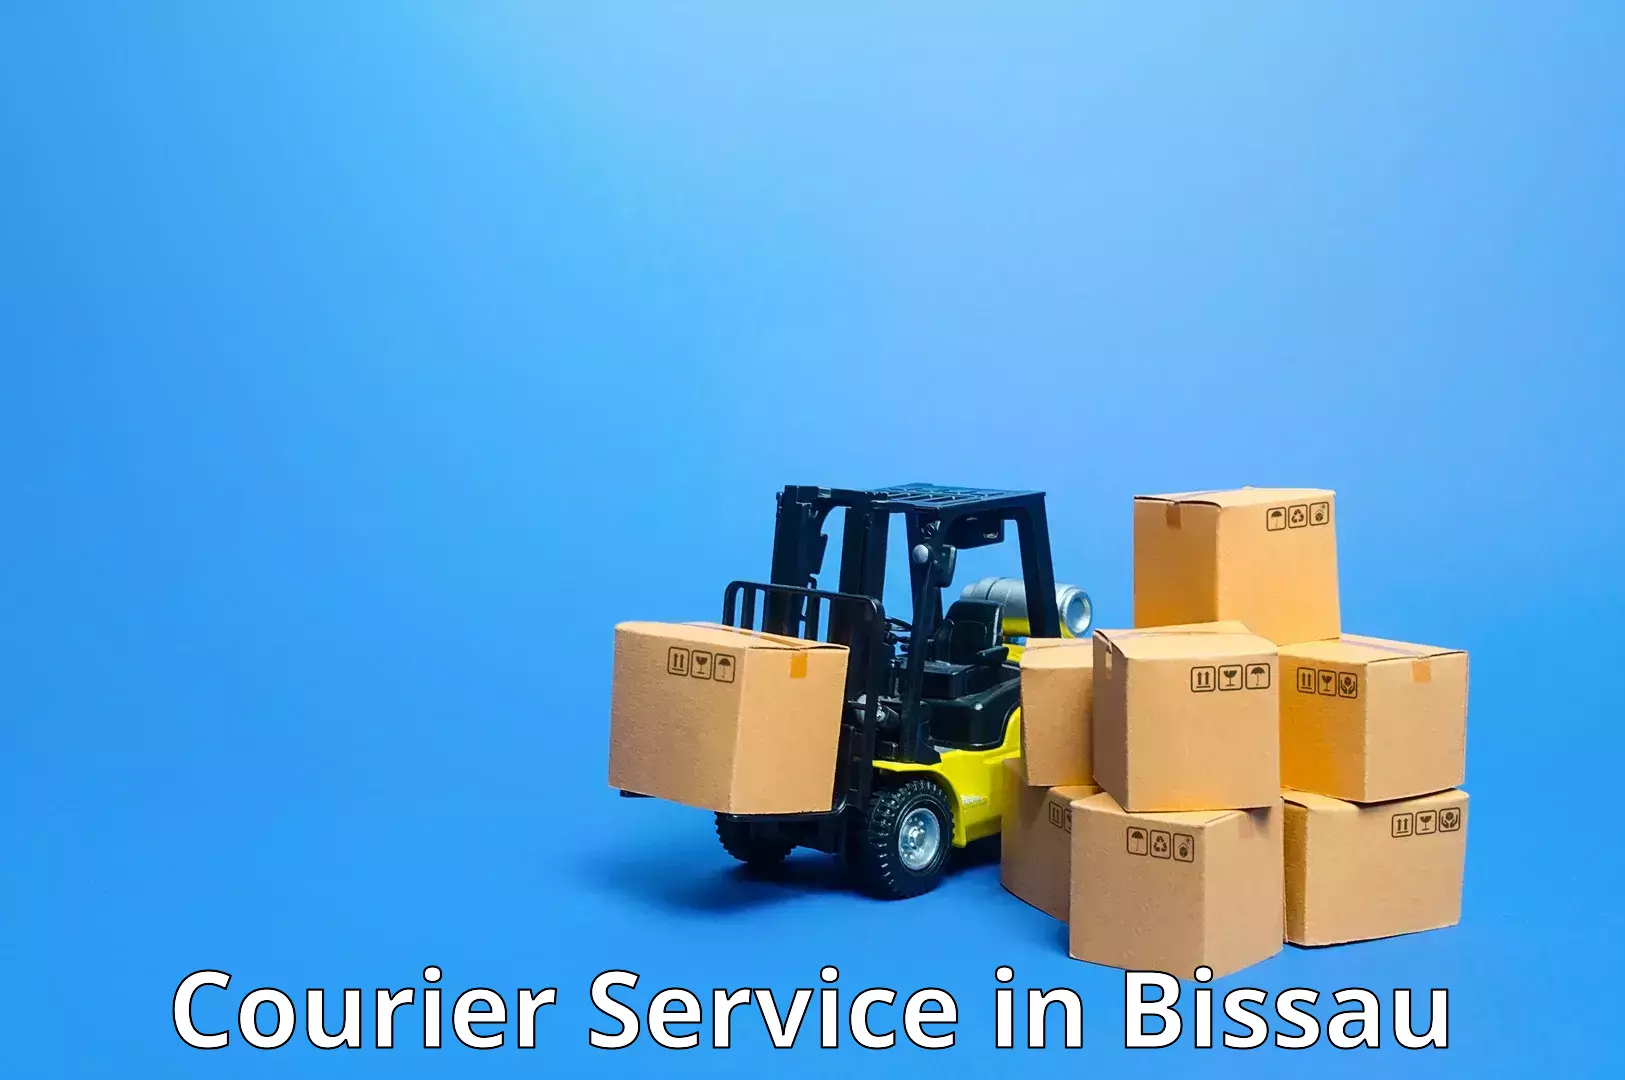 Same-day delivery options in Bissau